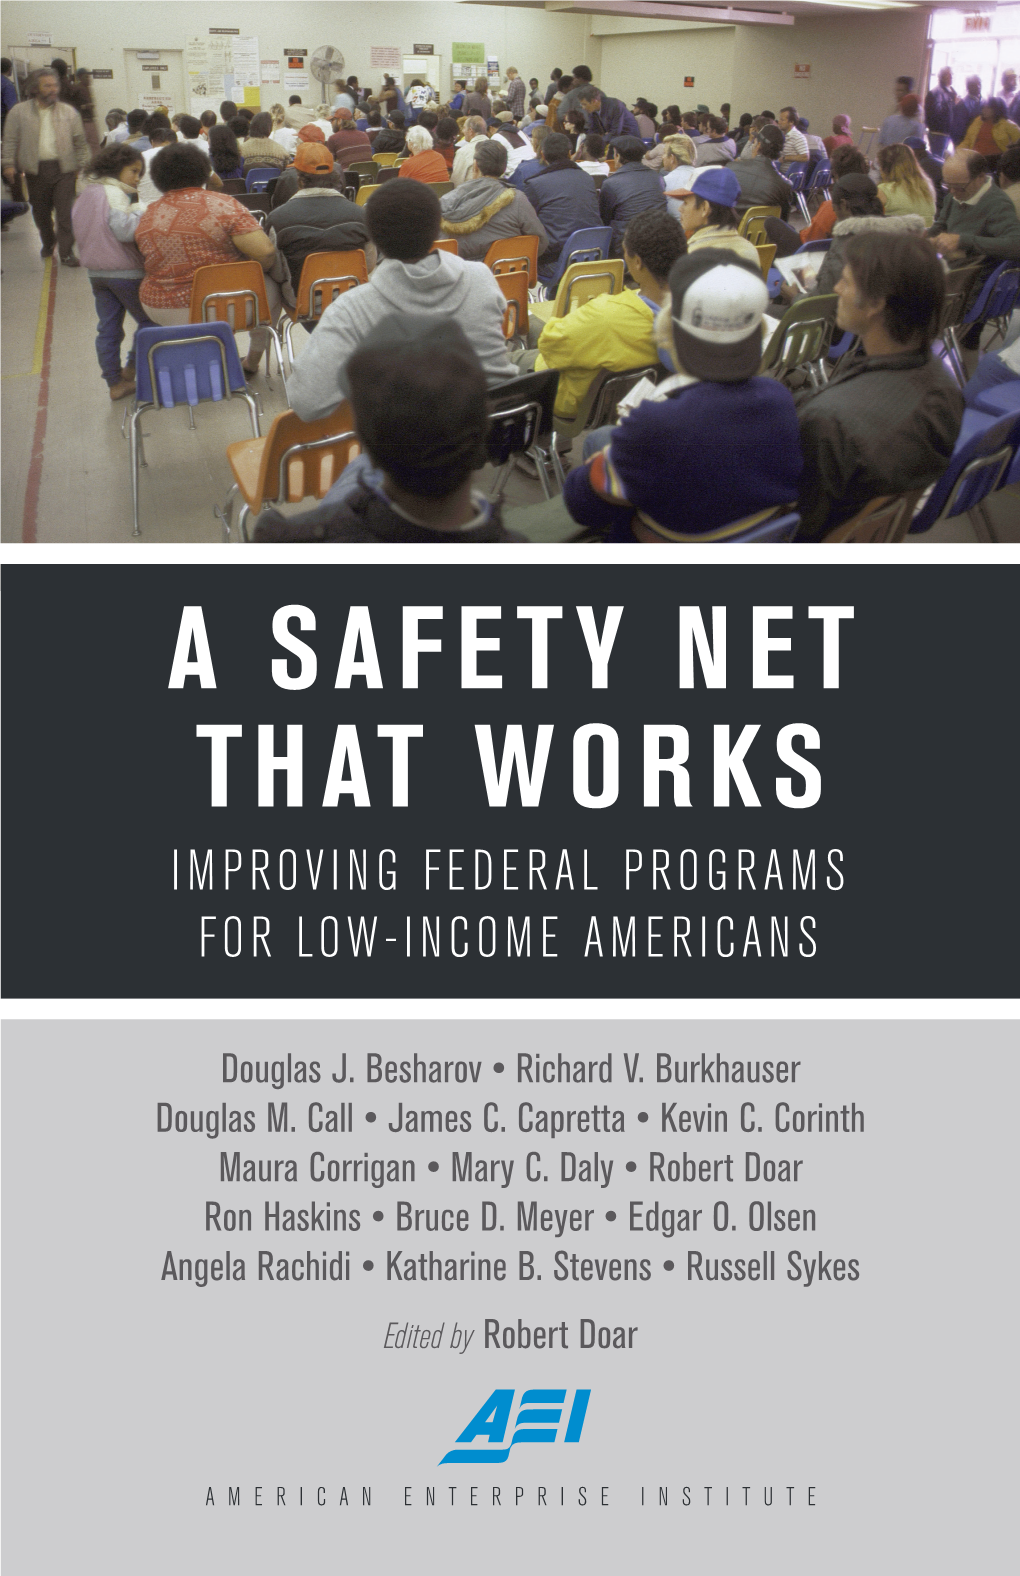 A Safety Net That Works Improving Federal Programs for Low-Income Americans